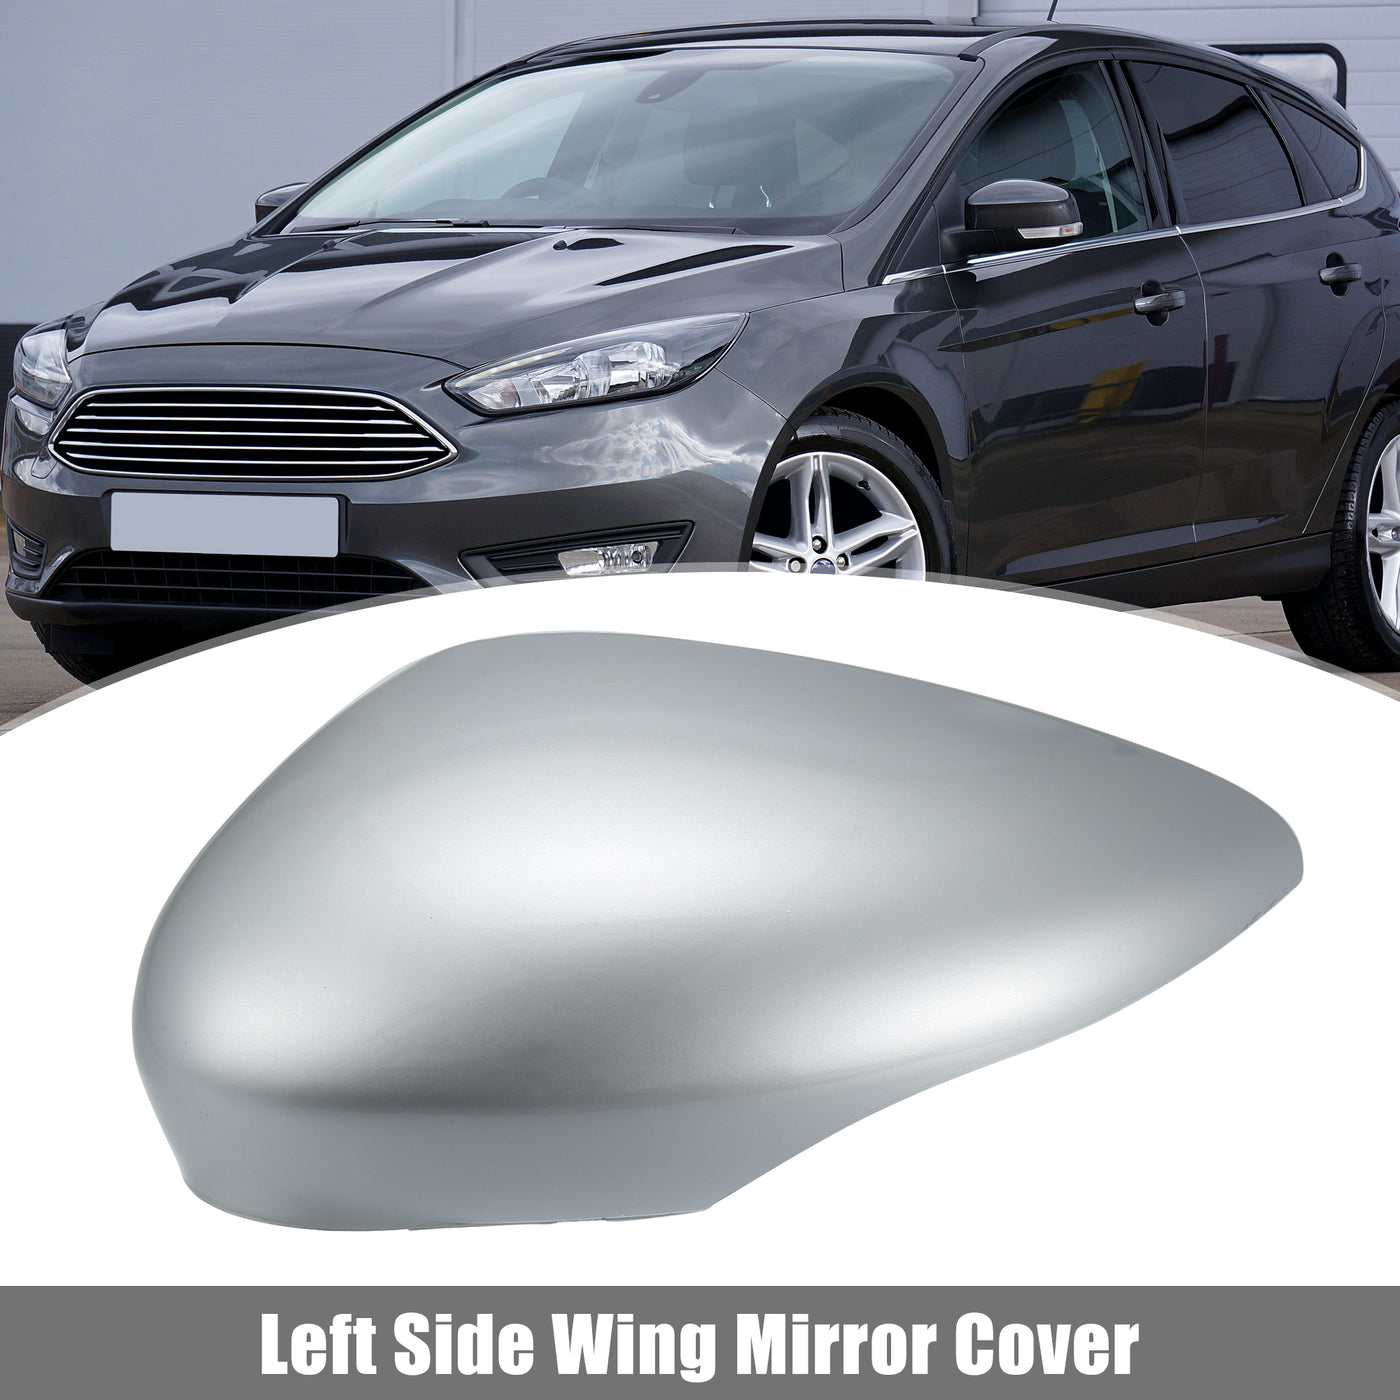 X AUTOHAUX Silver Tone Left Side Car Side Door Wing Mirror Cover Rear View Mirror Cap for Ford Fiesta MK7 2008 2009 2010 2011 2012 2013 2014 2015 2016 2017